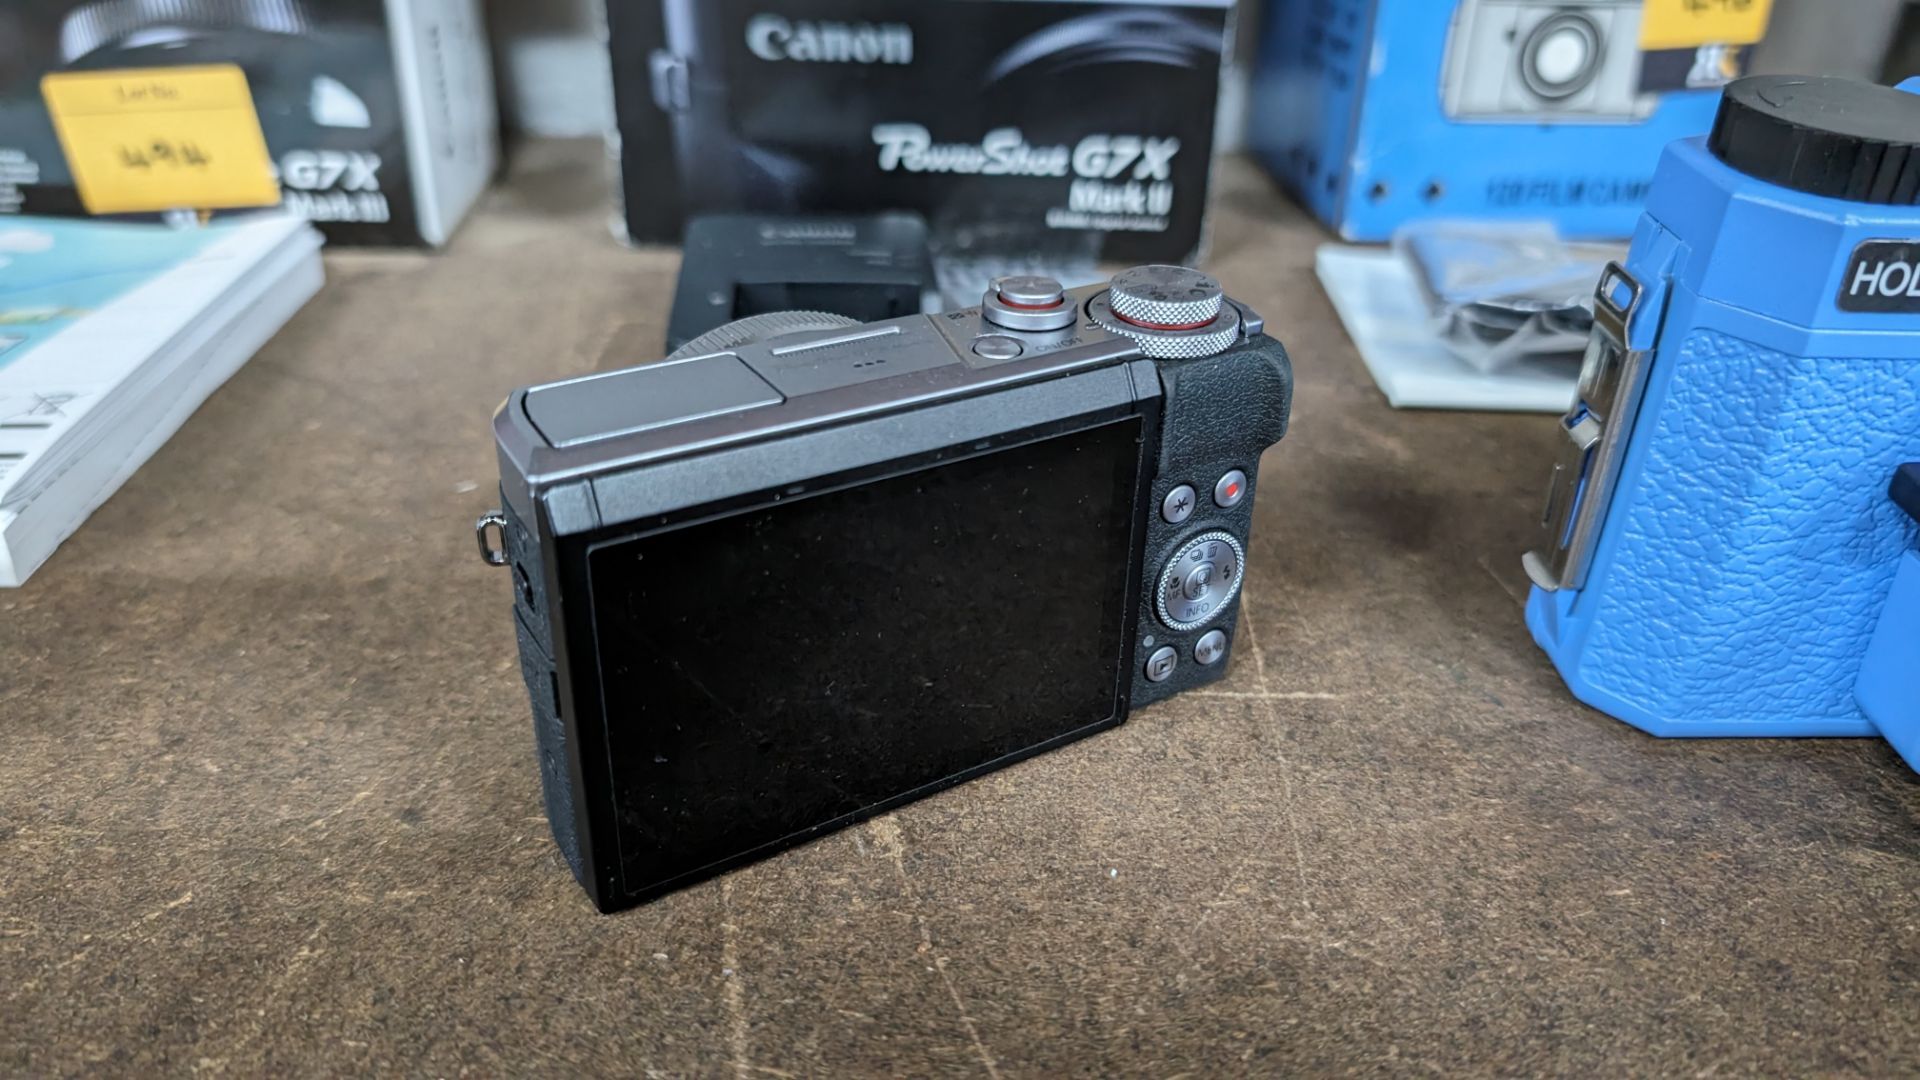 Canon PowerShot G7X Mark II camera, including battery and charger - Image 8 of 12